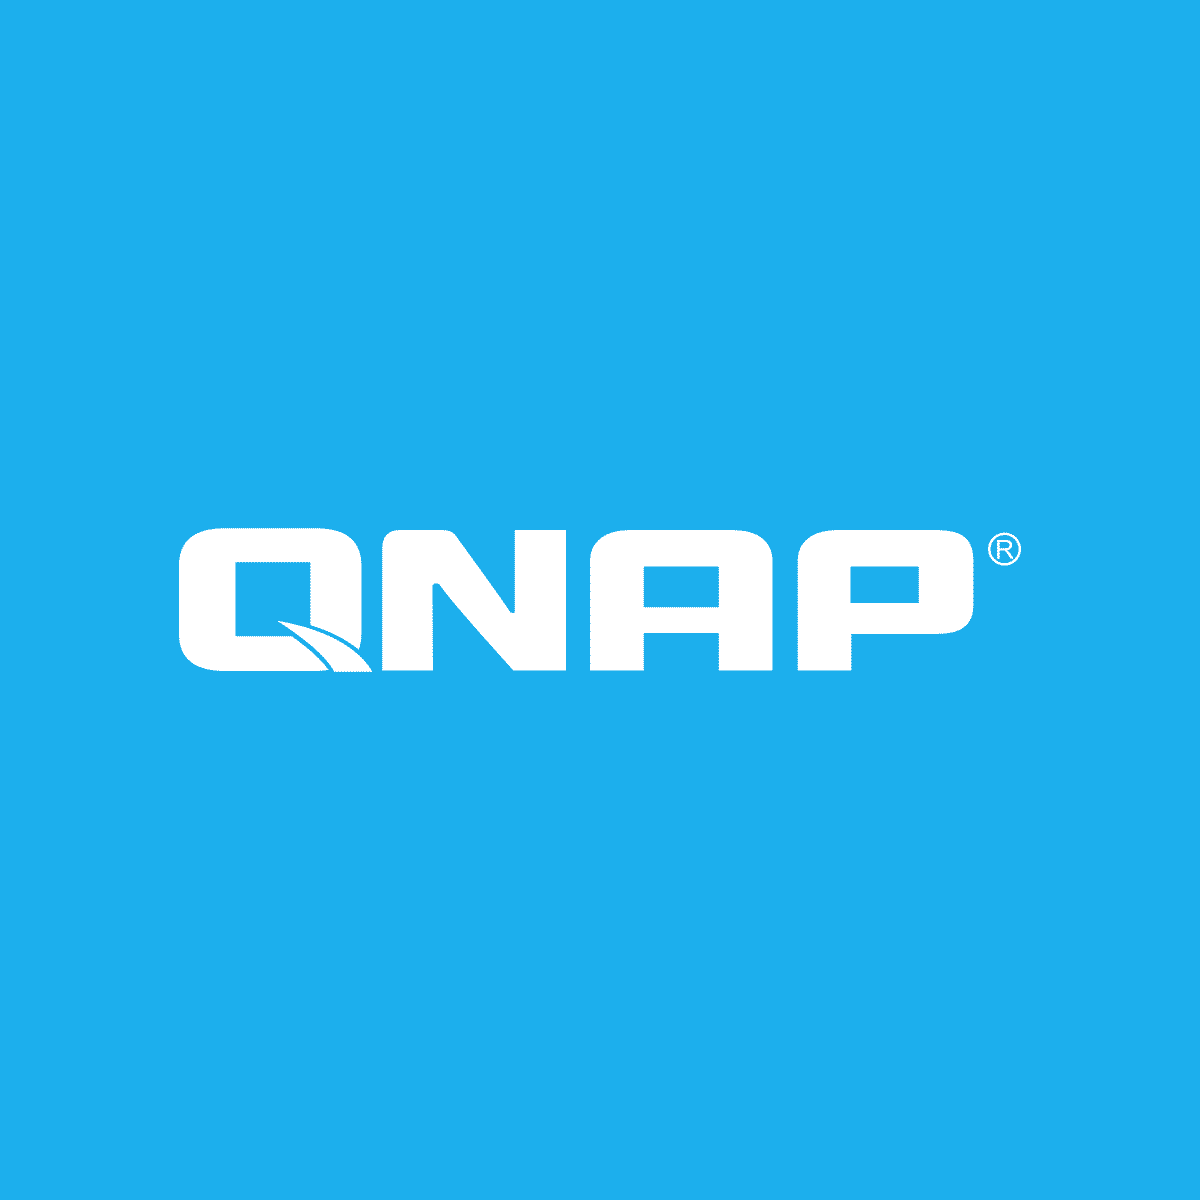 How to Use Windows ACL to Manage User Permissions on the QNAP NAS